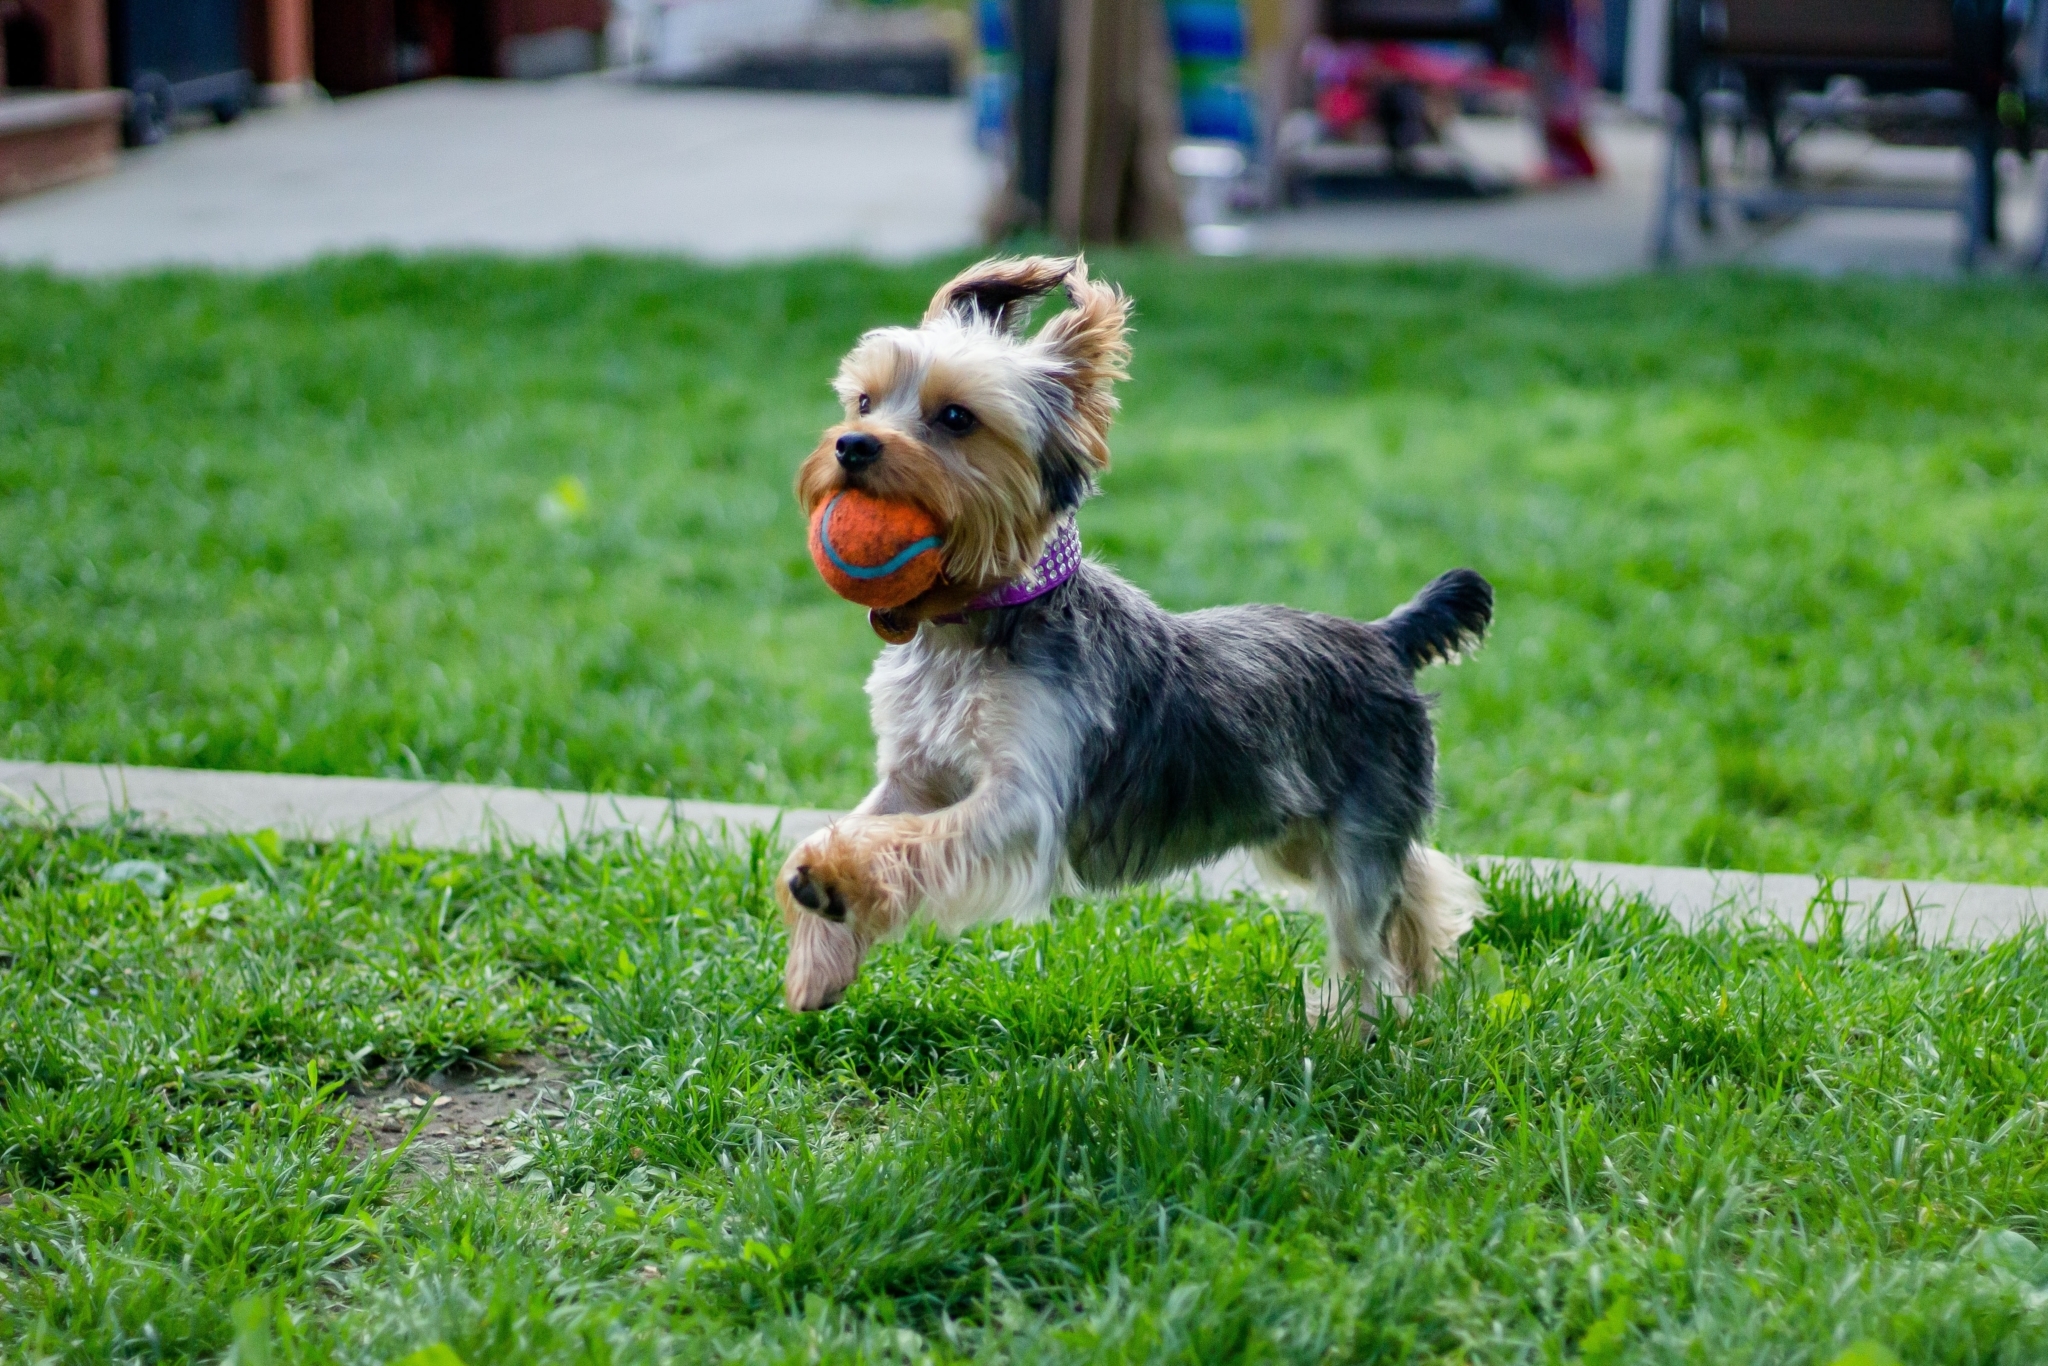 A Yorkshire terrier running across grass with a ball in its mouth